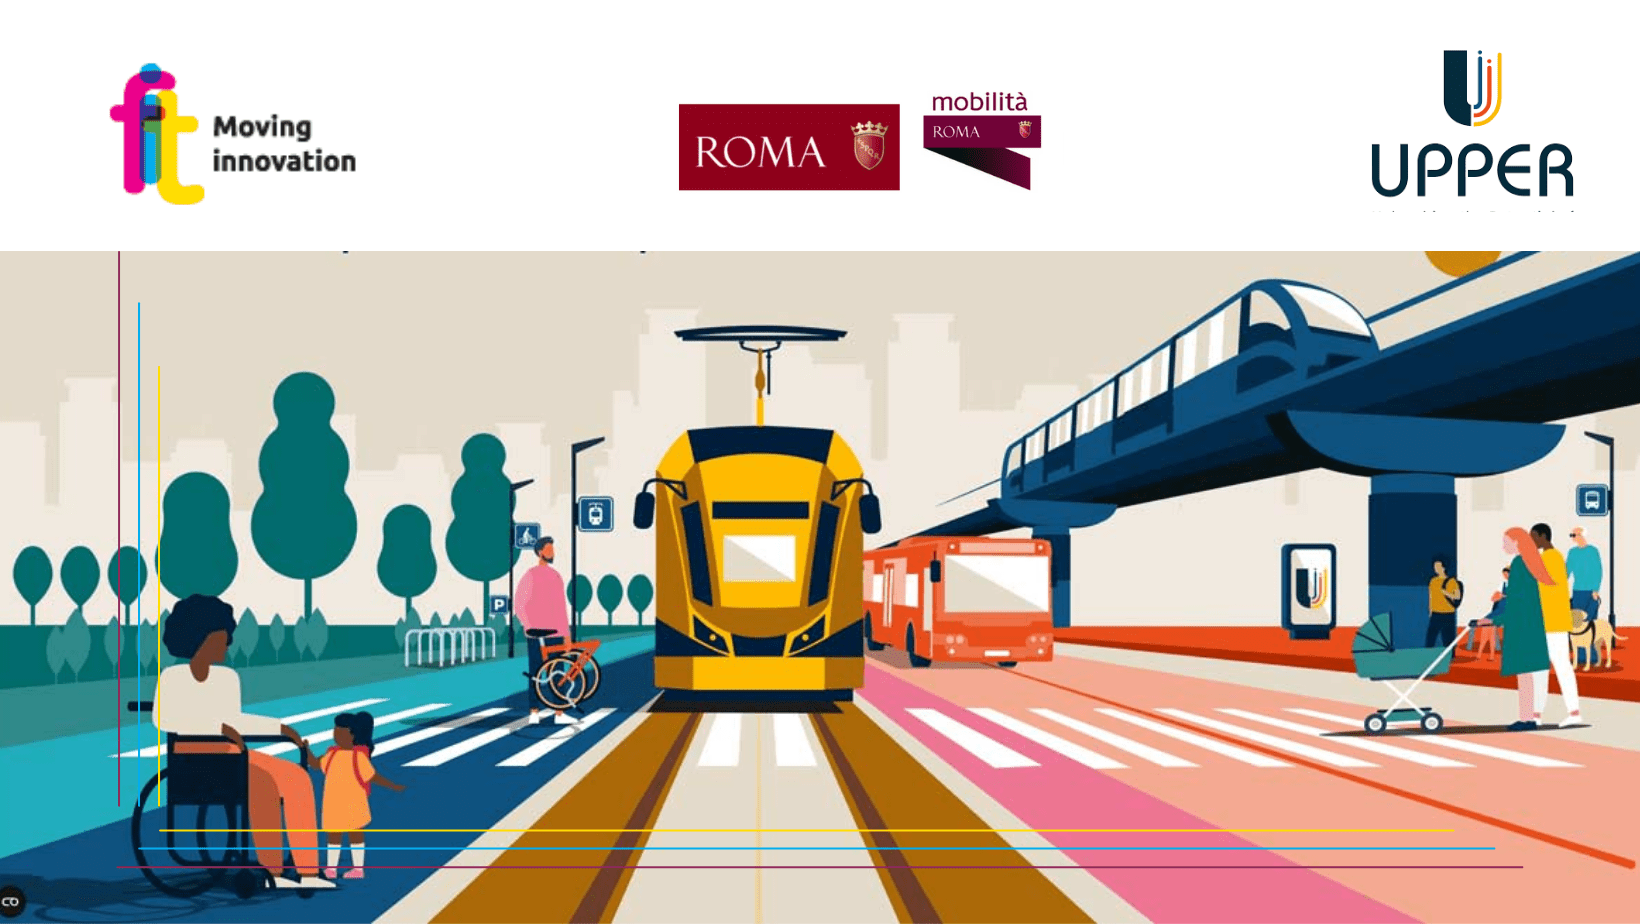 UPPER project, in Rome on 30 and 31 January we will talk about Public Transport